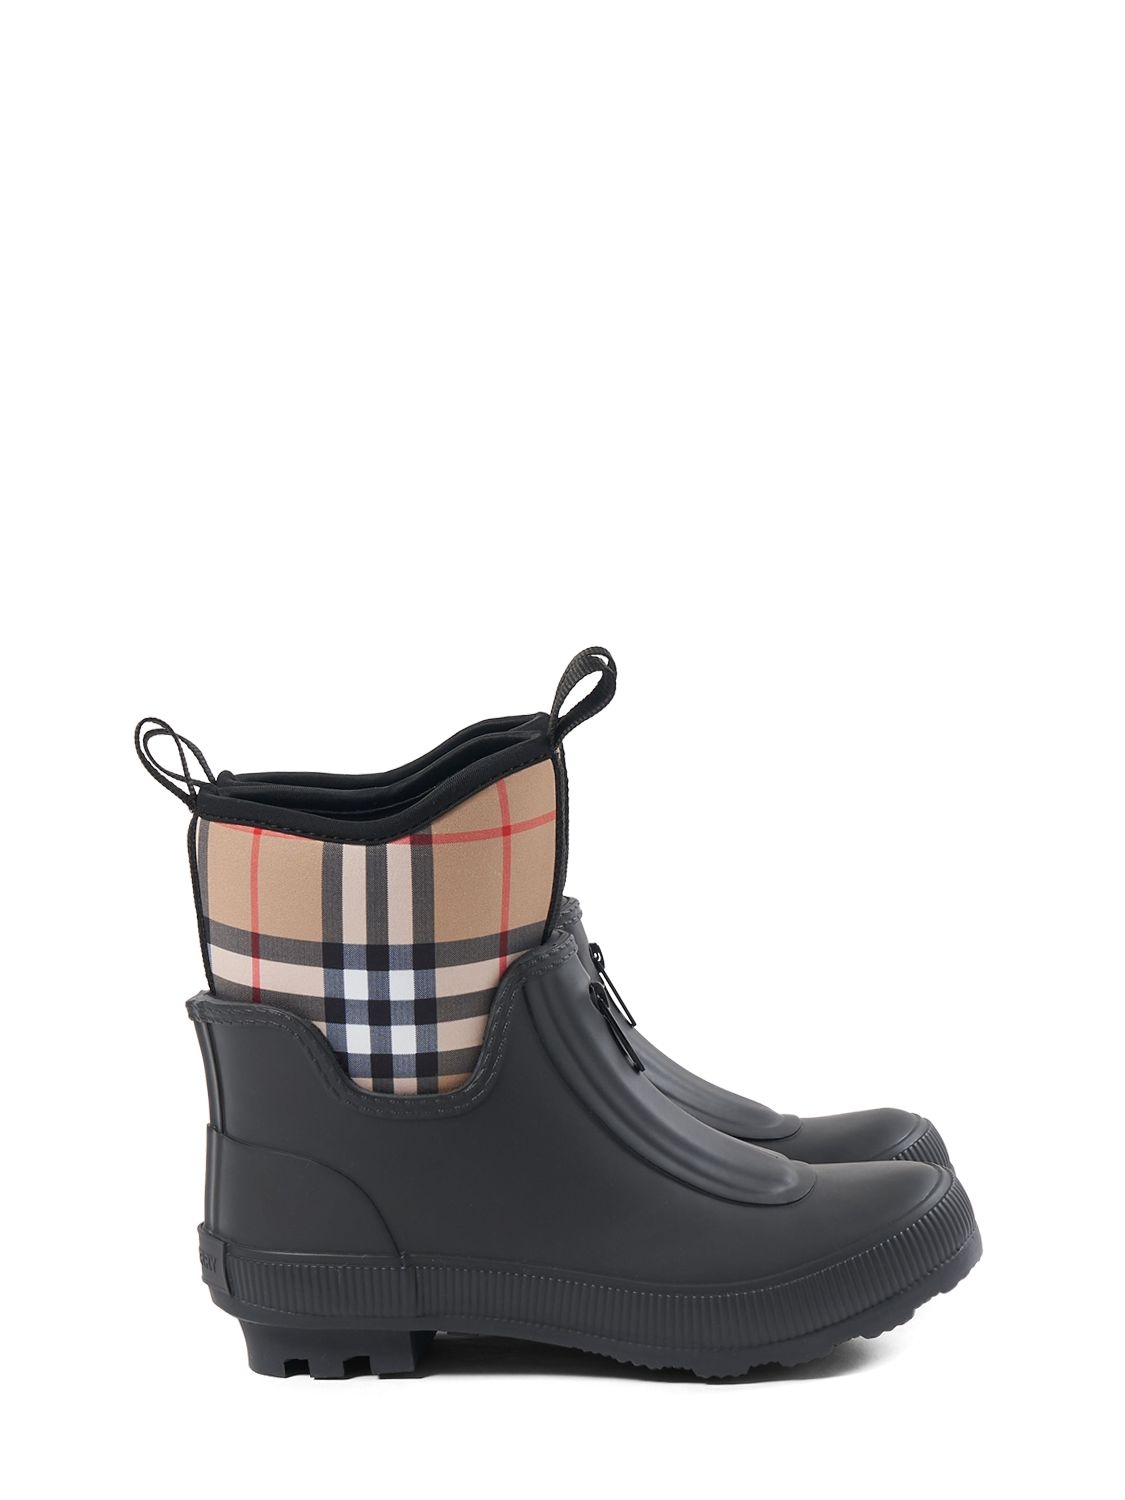 Rubber Ankle Boots W/check Print Inserts